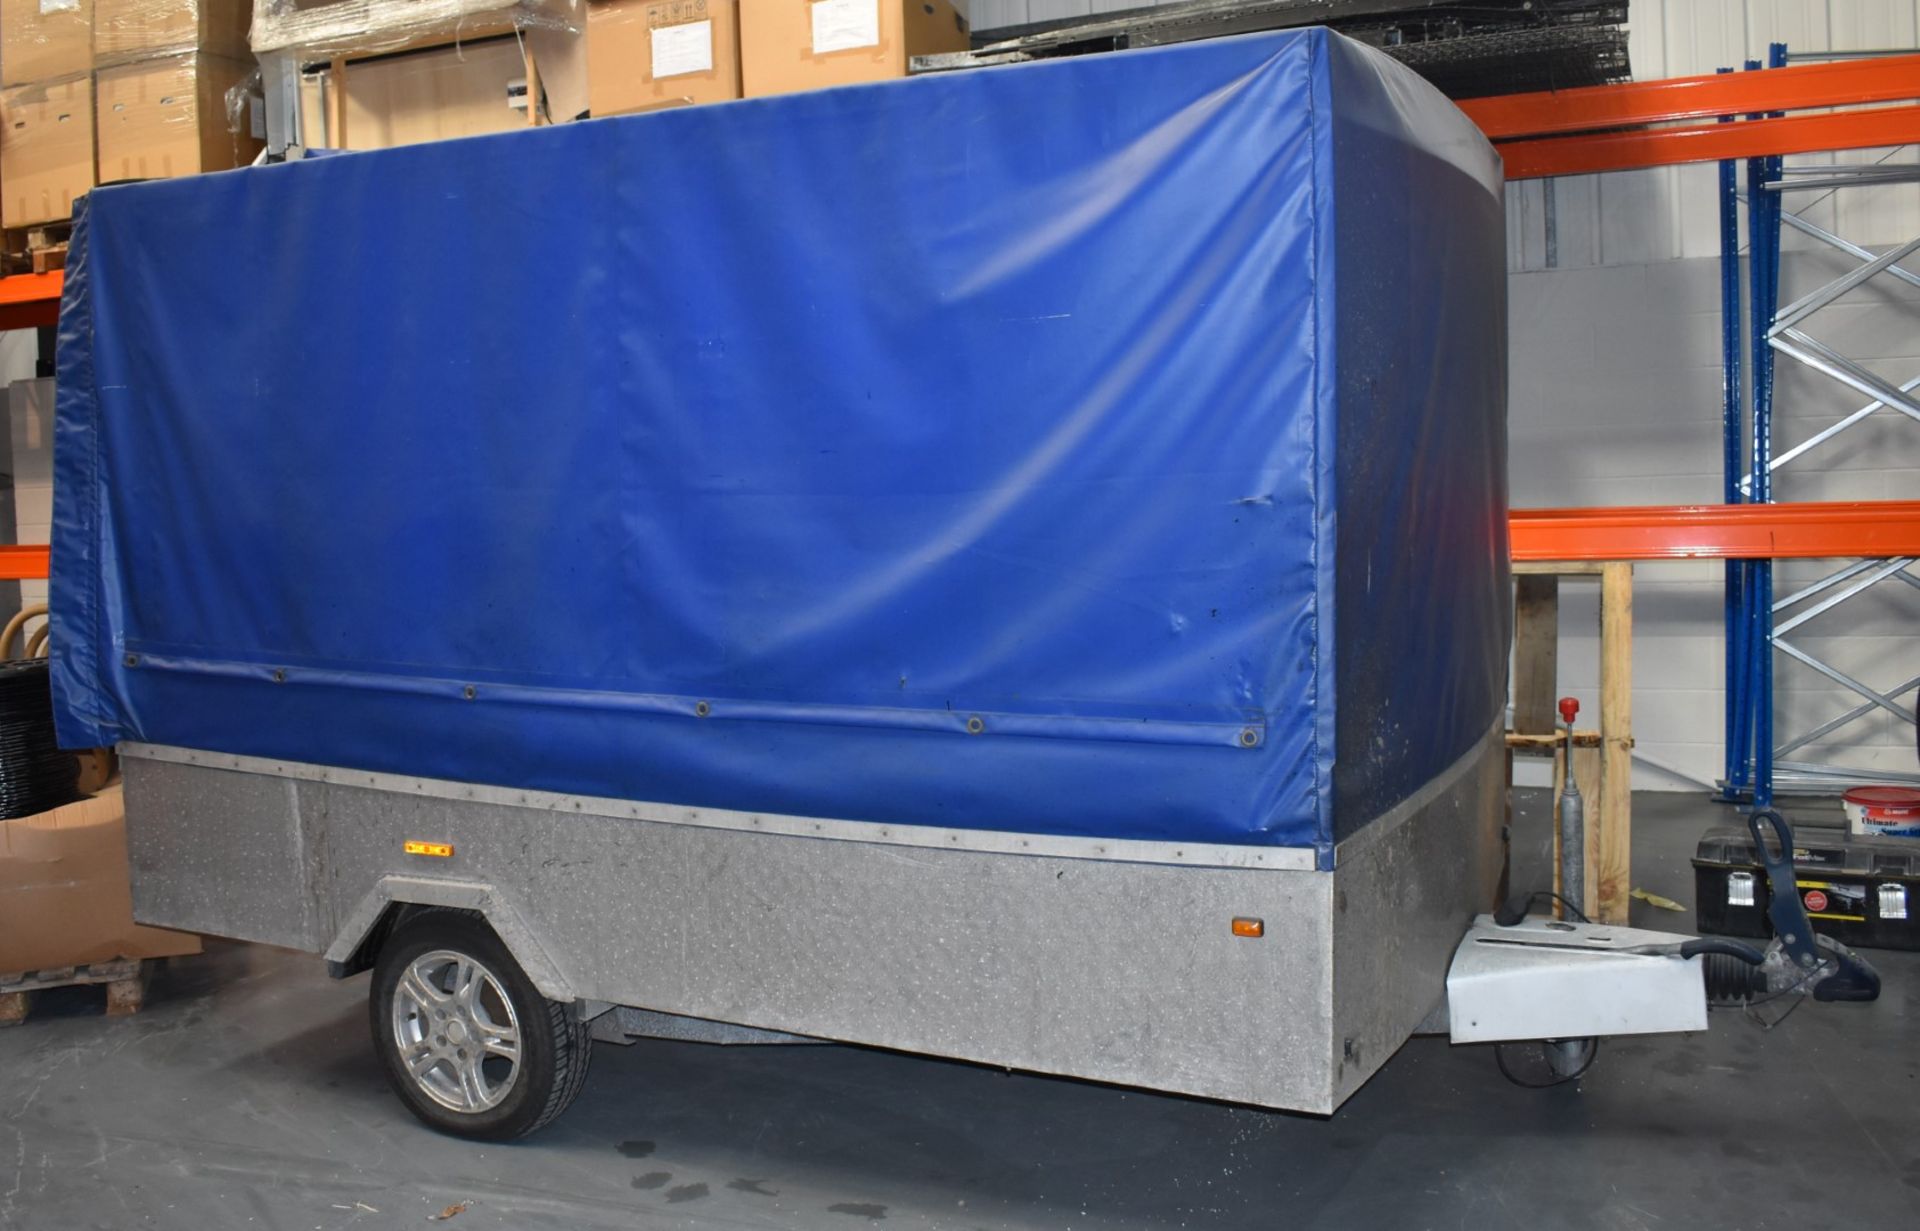 1 x Customised 10x6ft Tow Trailer With Aluminium Frame Enclosure and Heavy Duty Cover, BP WS3000